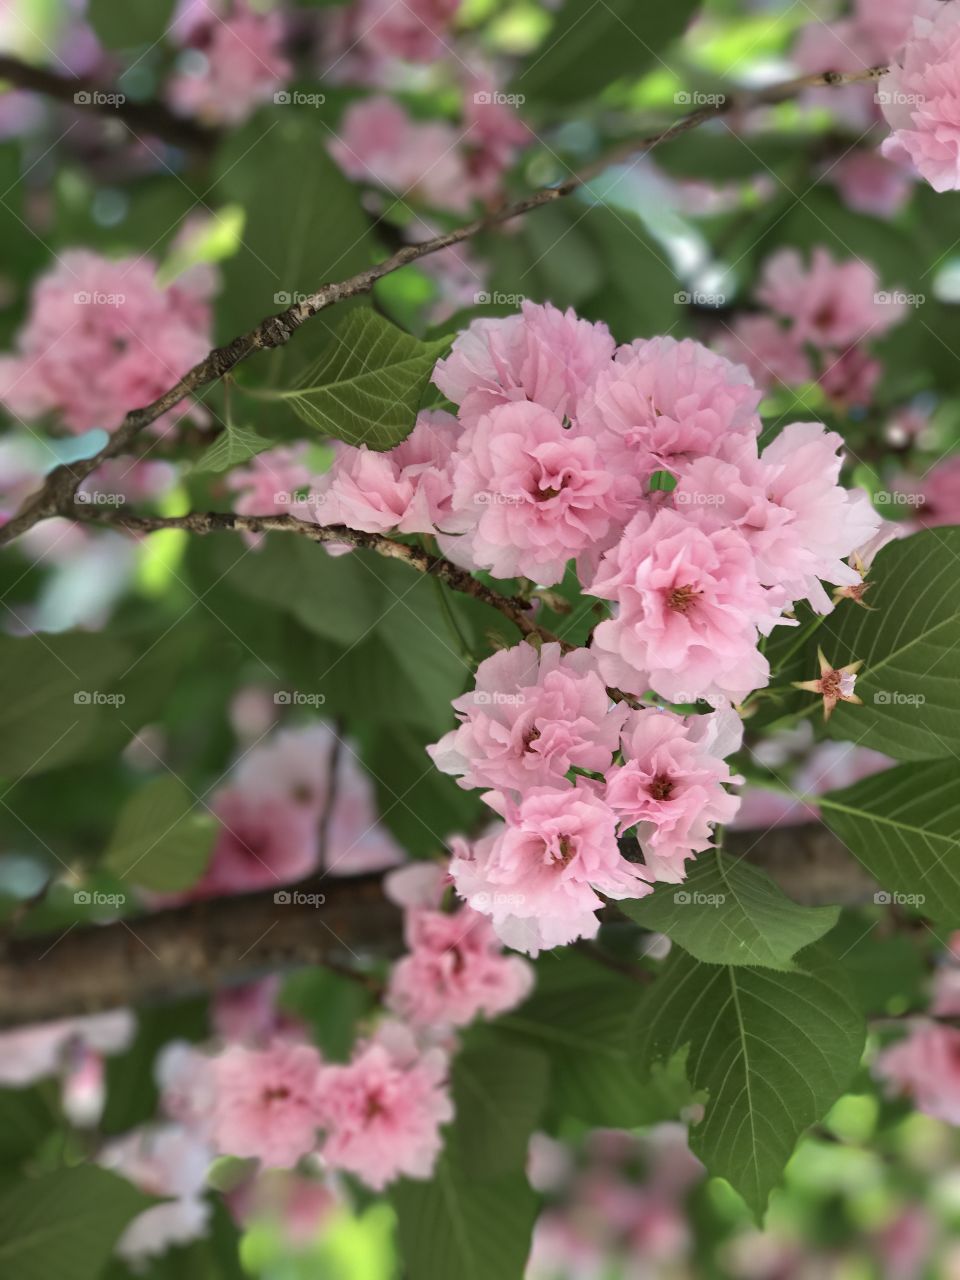 Blossoms in pink